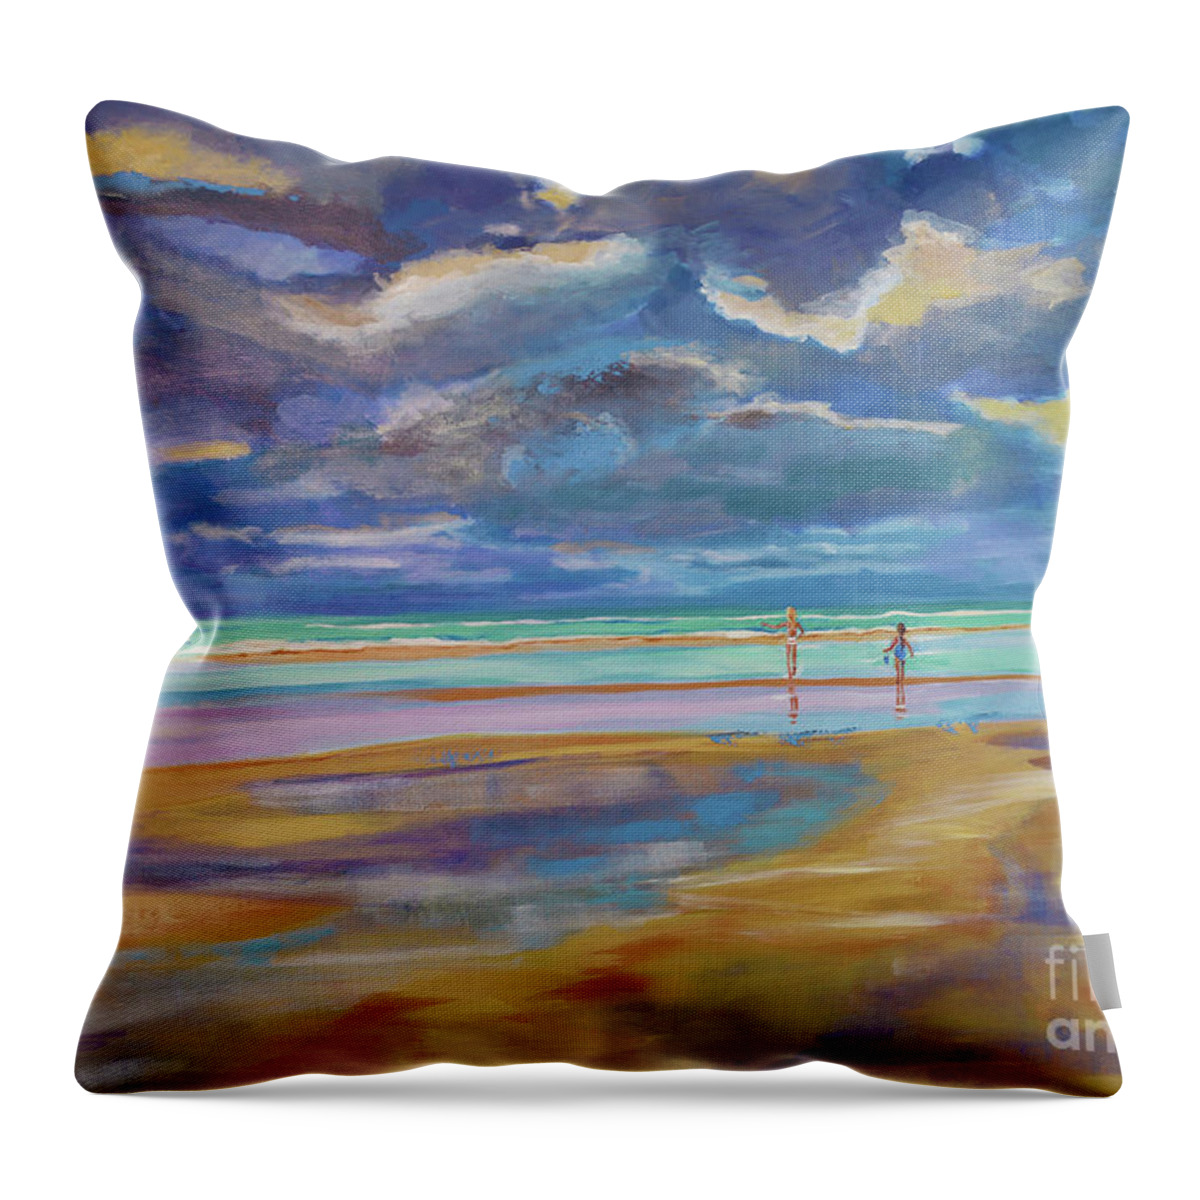 Original Throw Pillow featuring the painting Beach afternoon by Julianne Felton